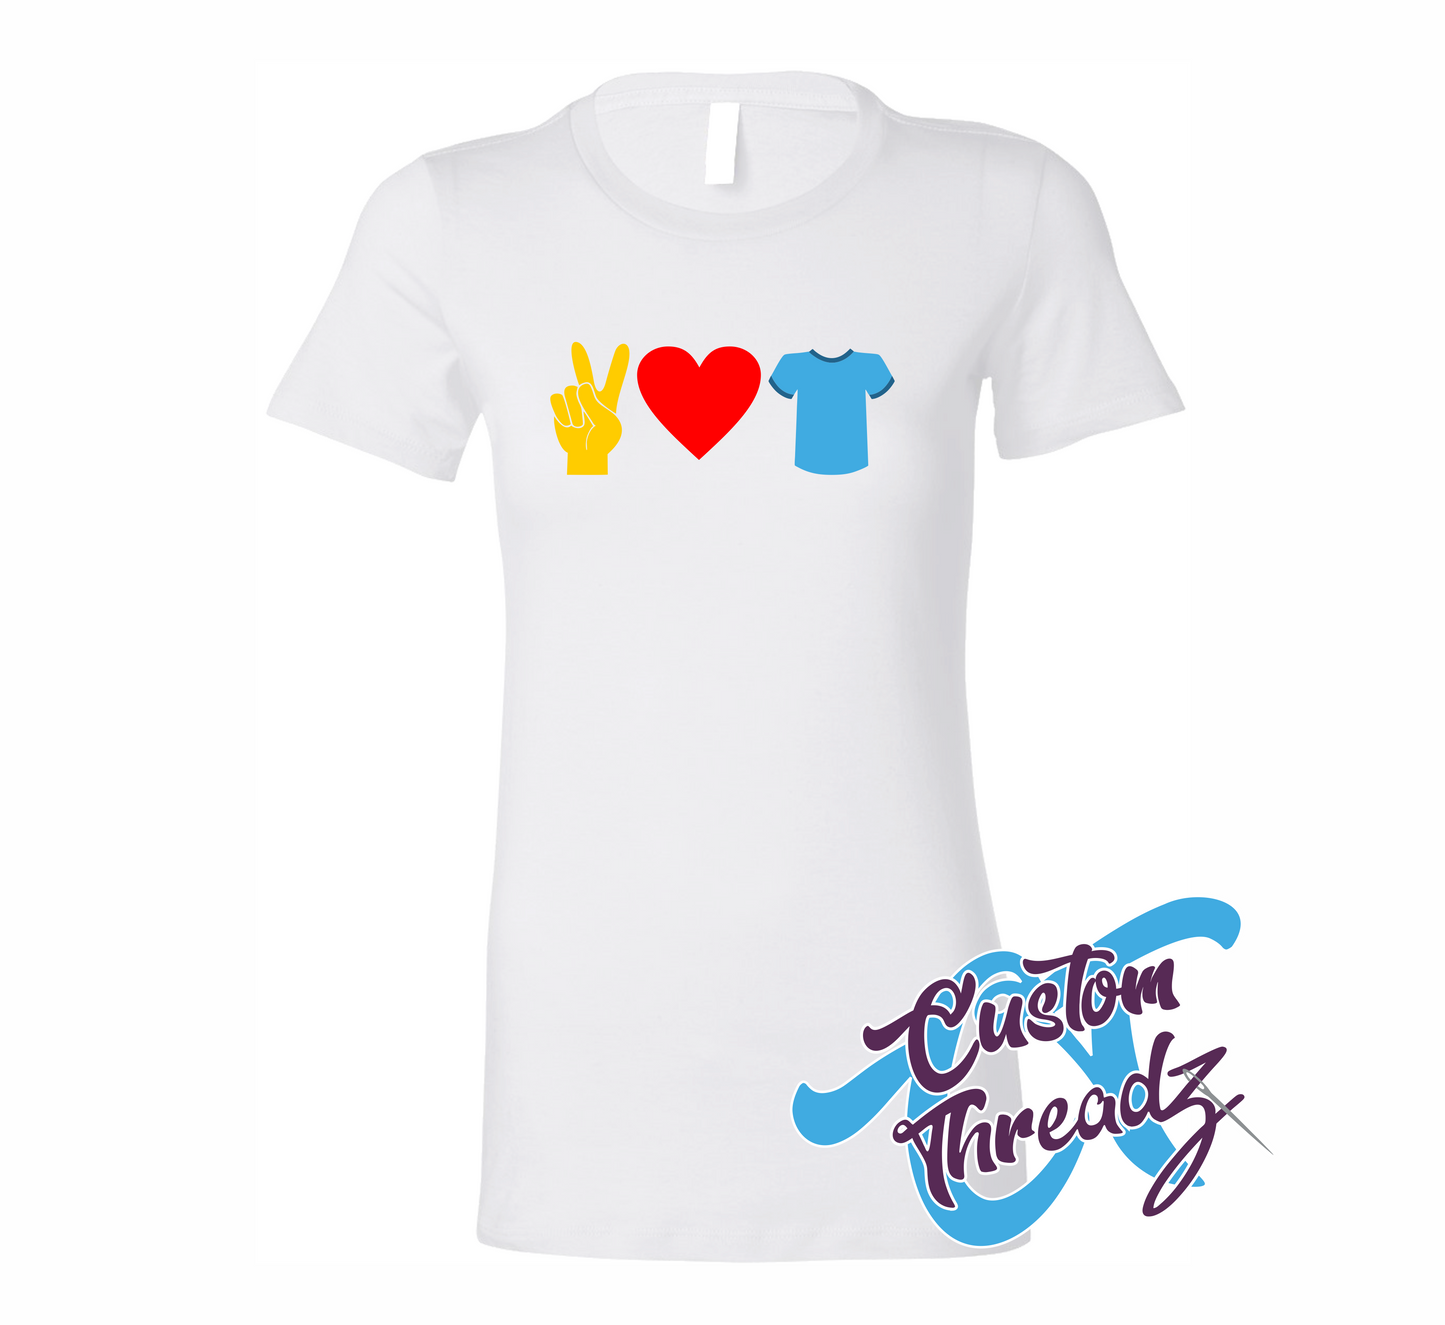 white womens tee with peace love and t-shirts DTG printed design